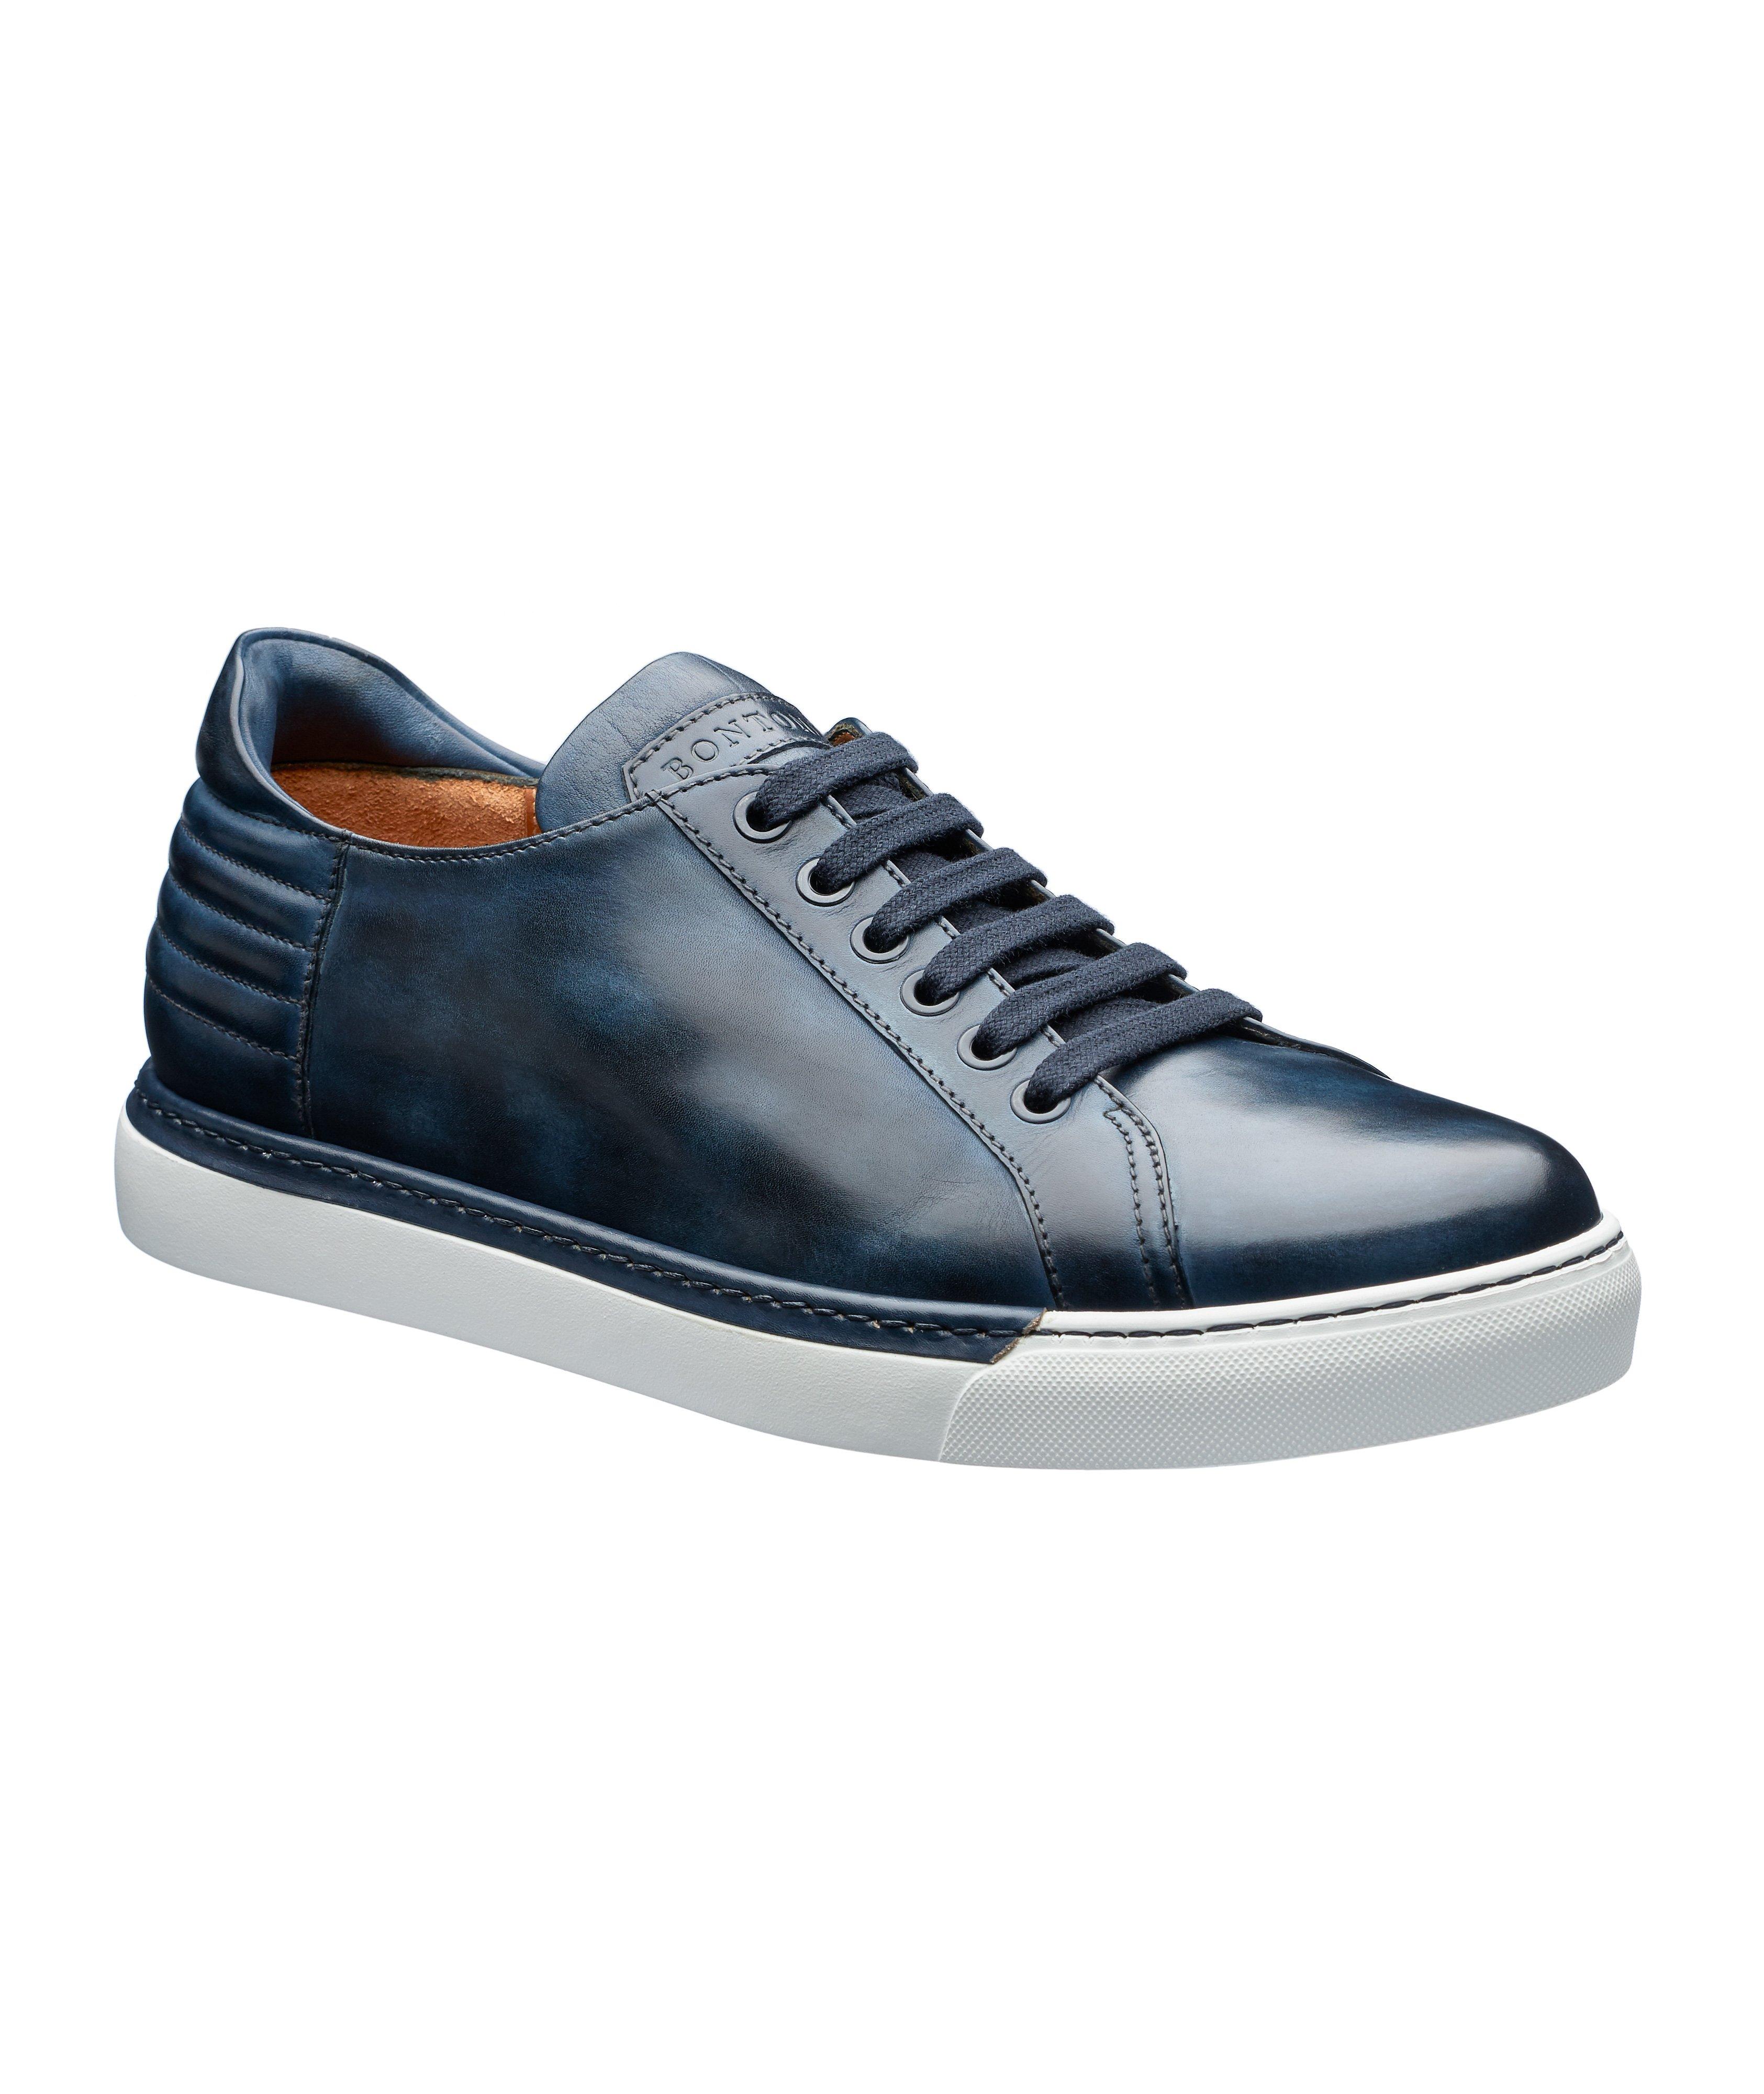 Burnished Leather Sneakers image 0